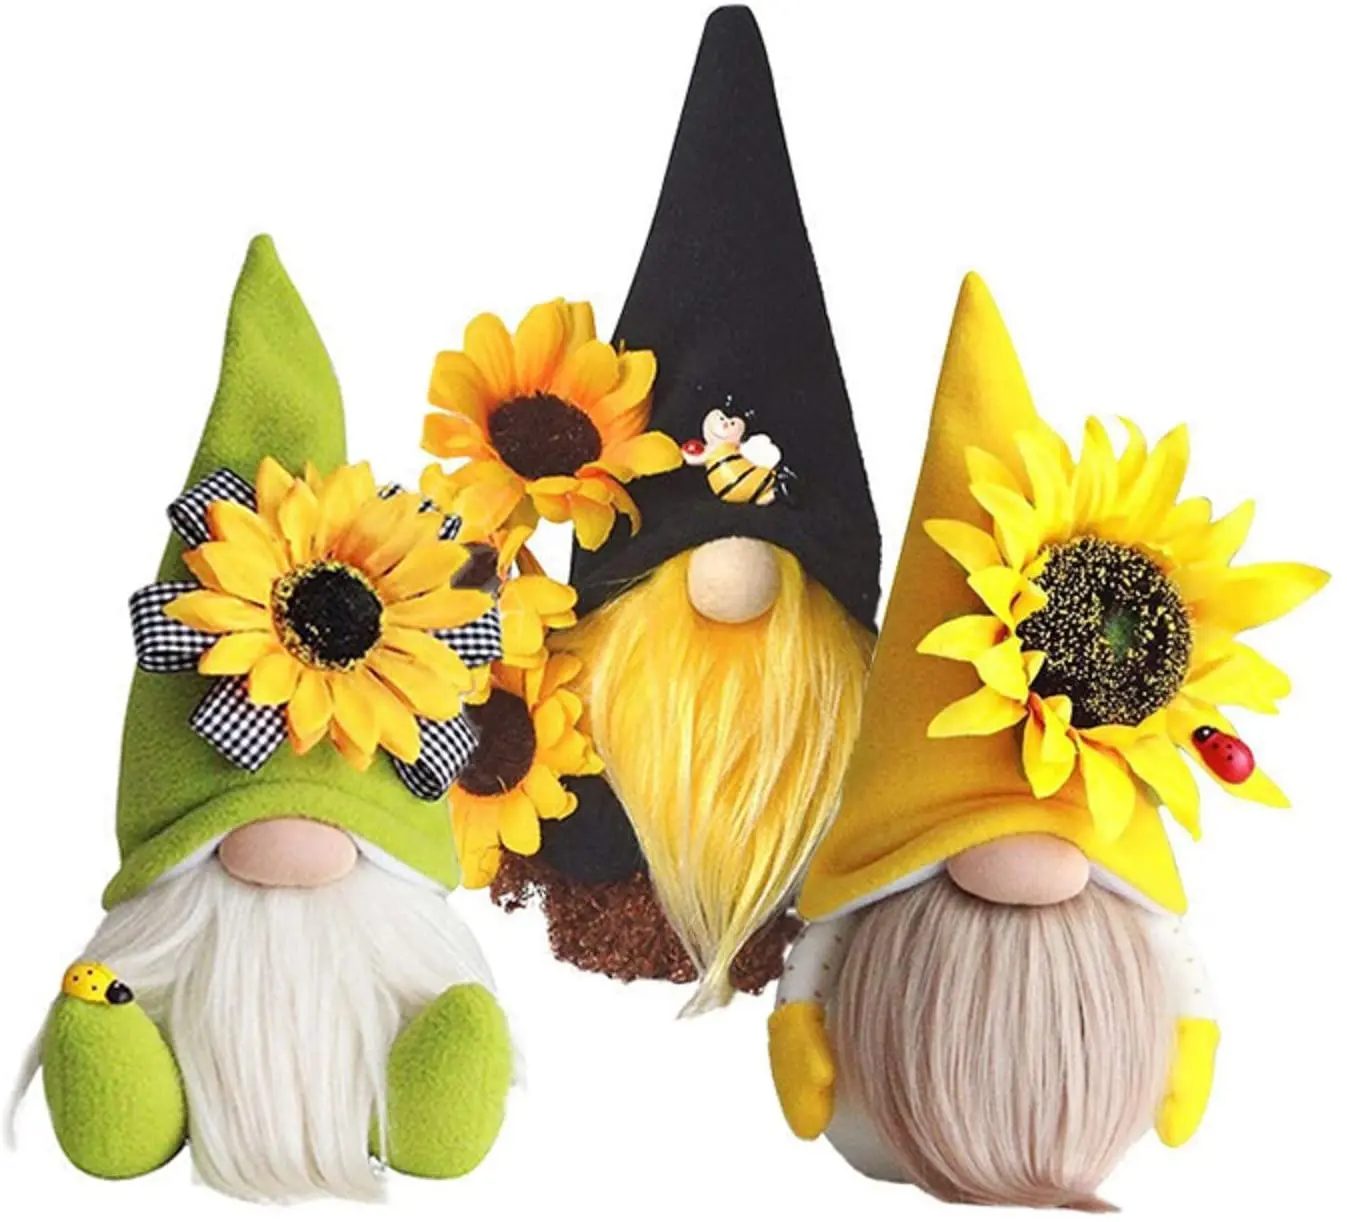 

3pcs Sunflower Spring Gnome Mantel Display Farmhouse Tiered Tray Rustic Scandinavian Gnome Figurines Bee Doll Christmas Oranment